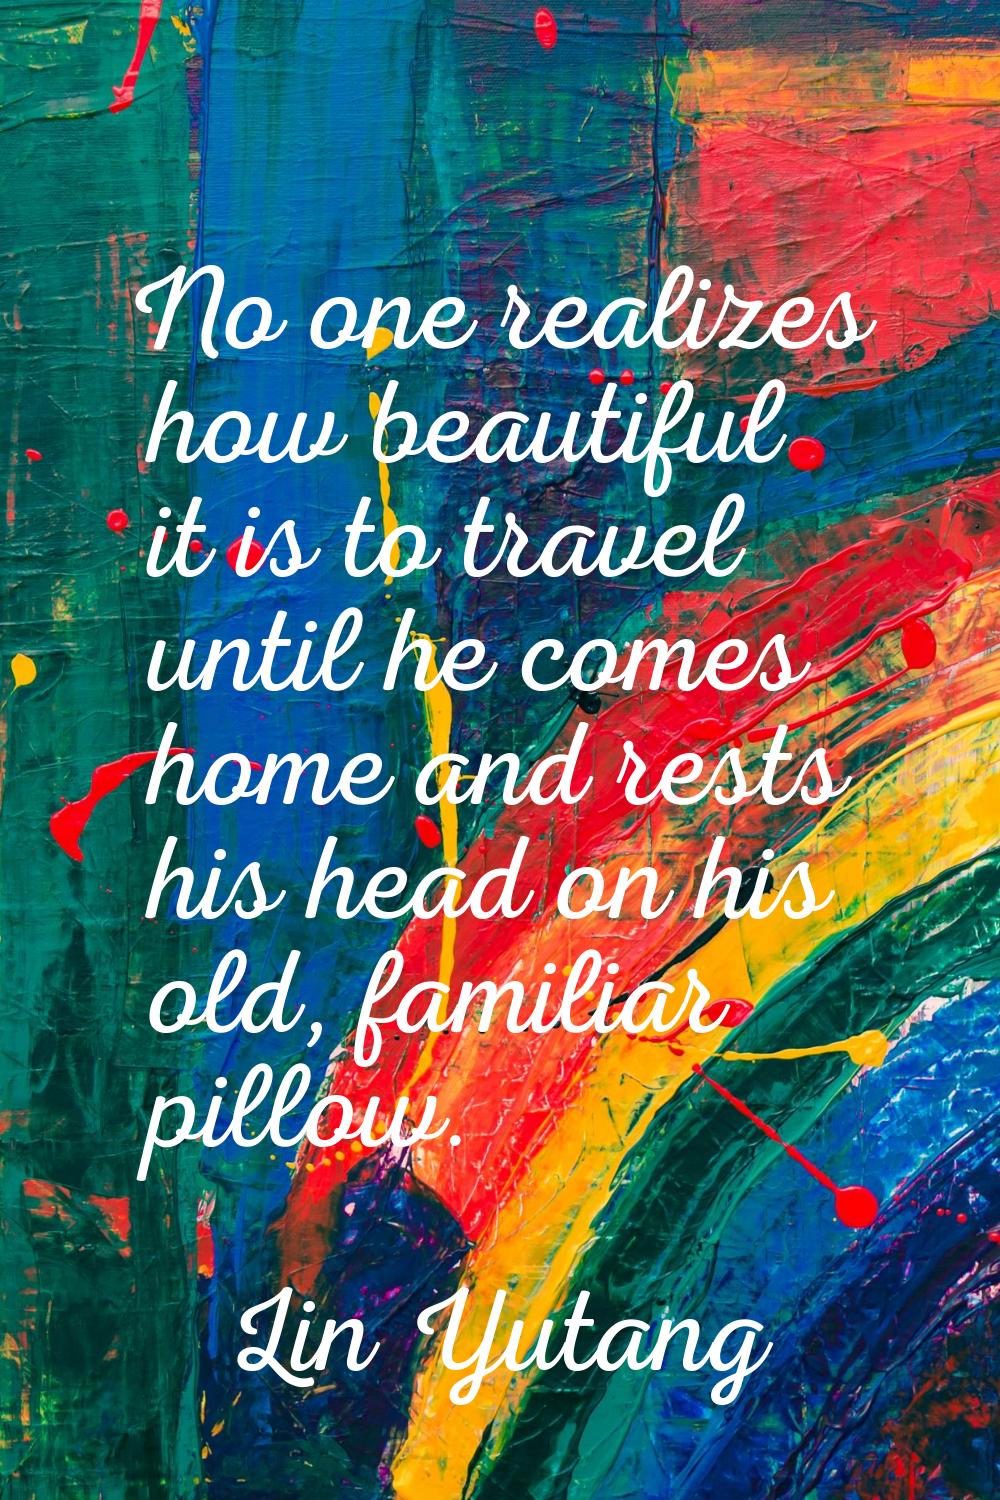 No one realizes how beautiful it is to travel until he comes home and rests his head on his old, fa